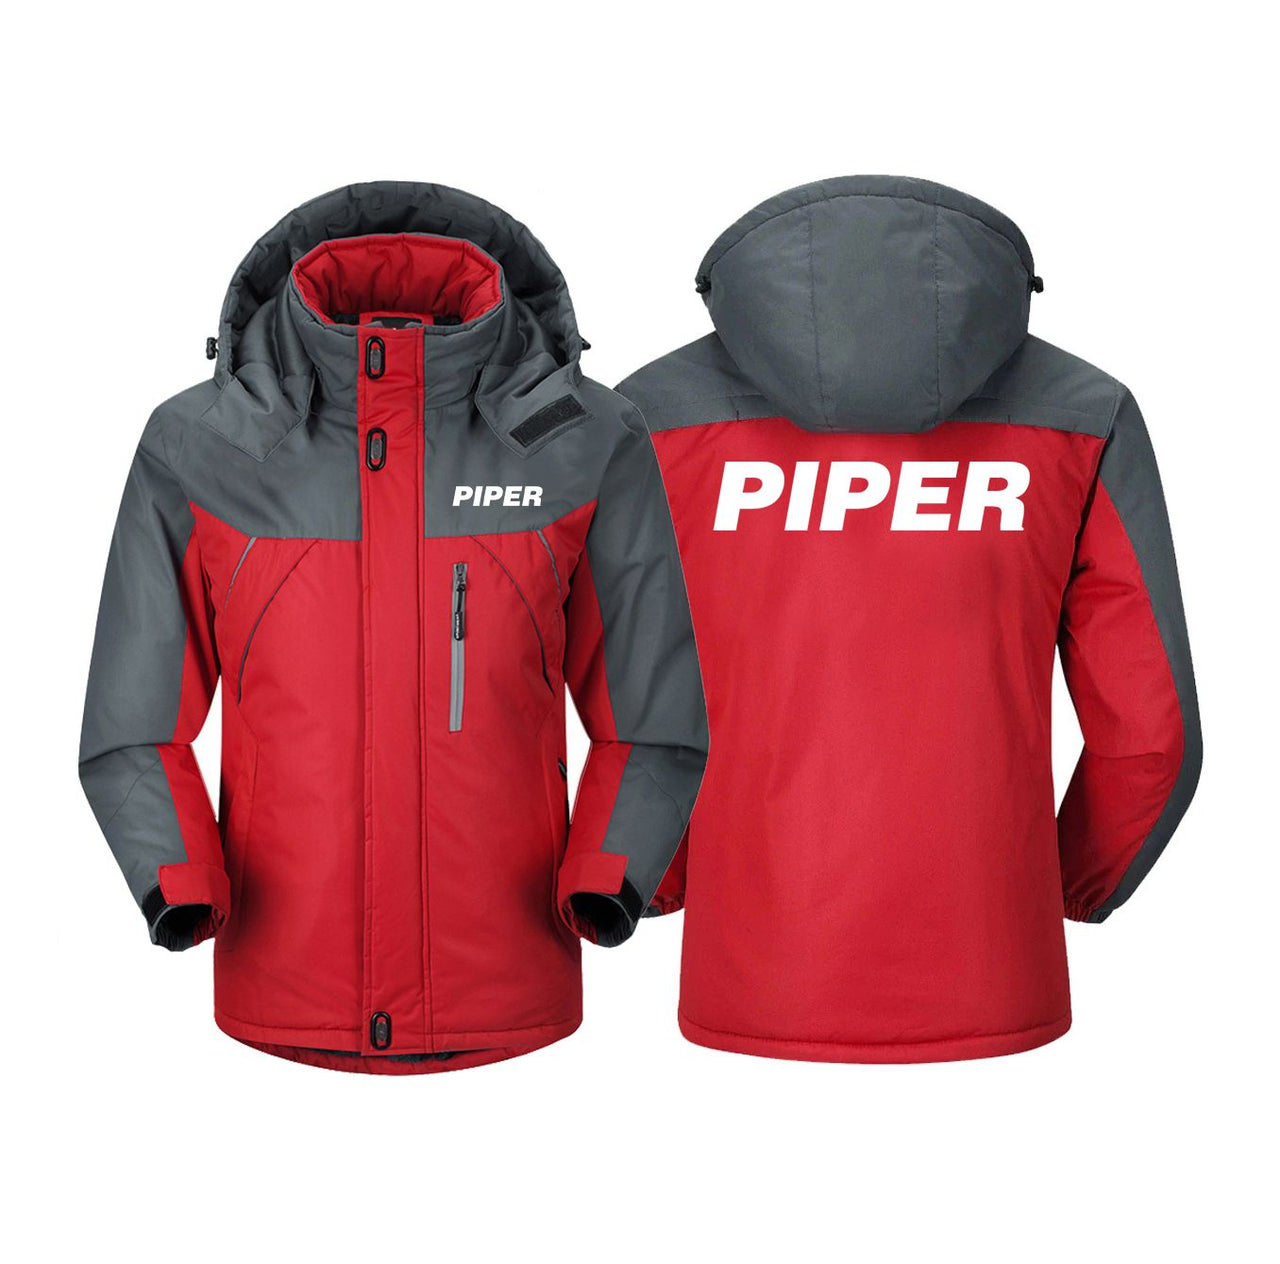 Piper & Text Designed Thick Winter Jackets